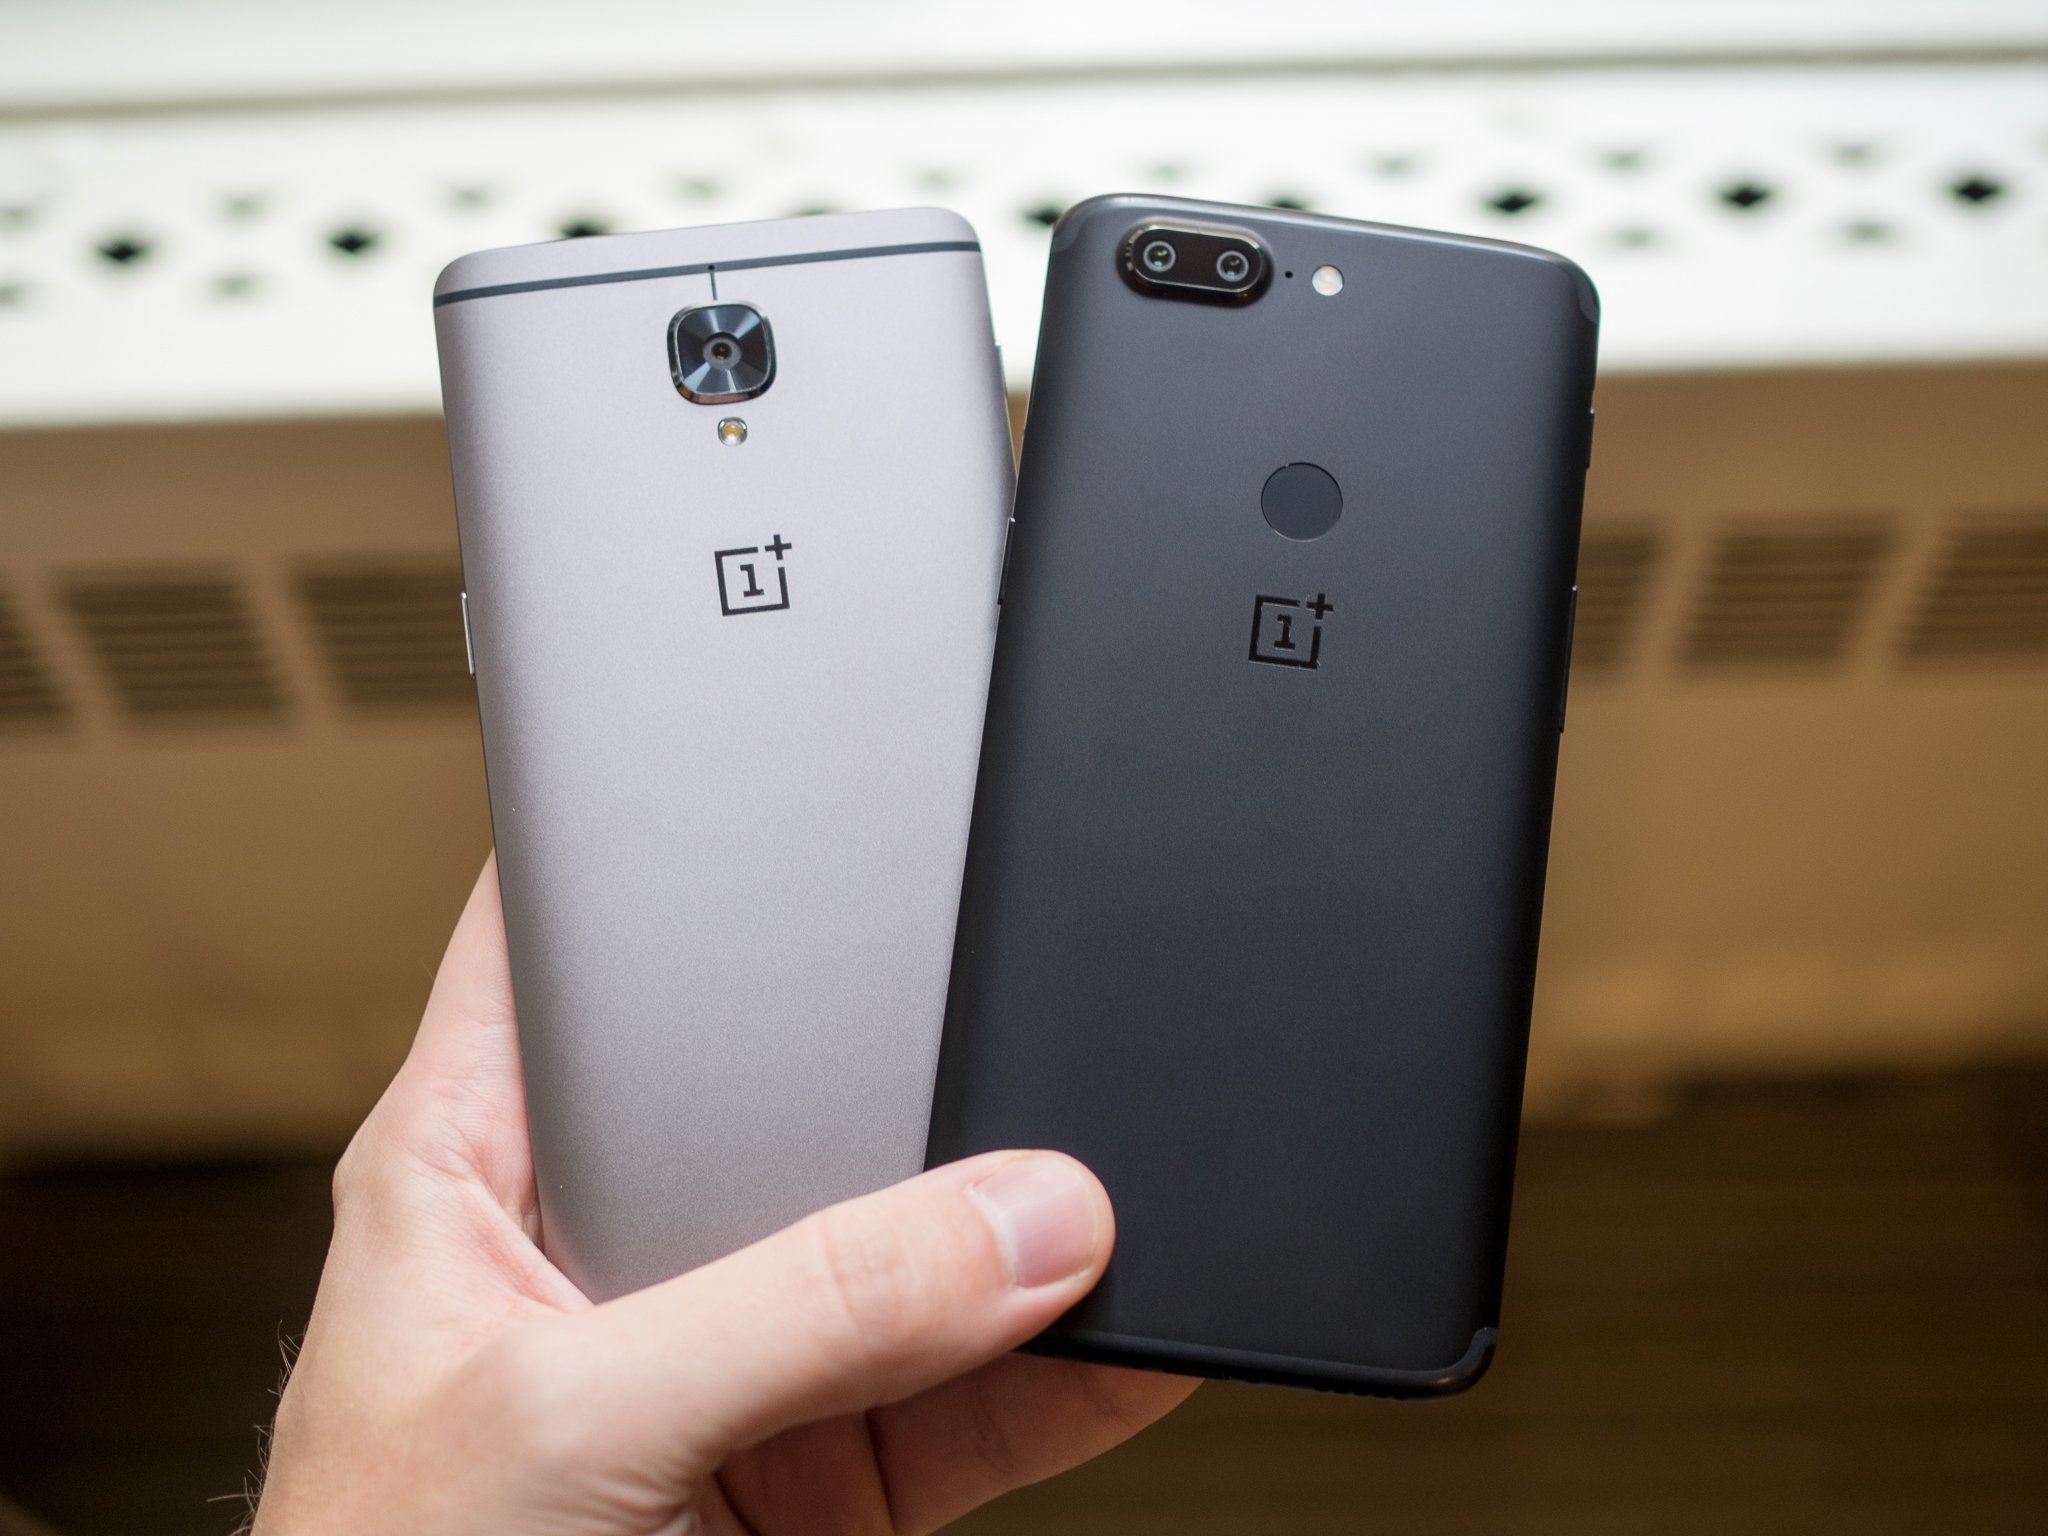 OnePlus 5T and OnePlus 3T